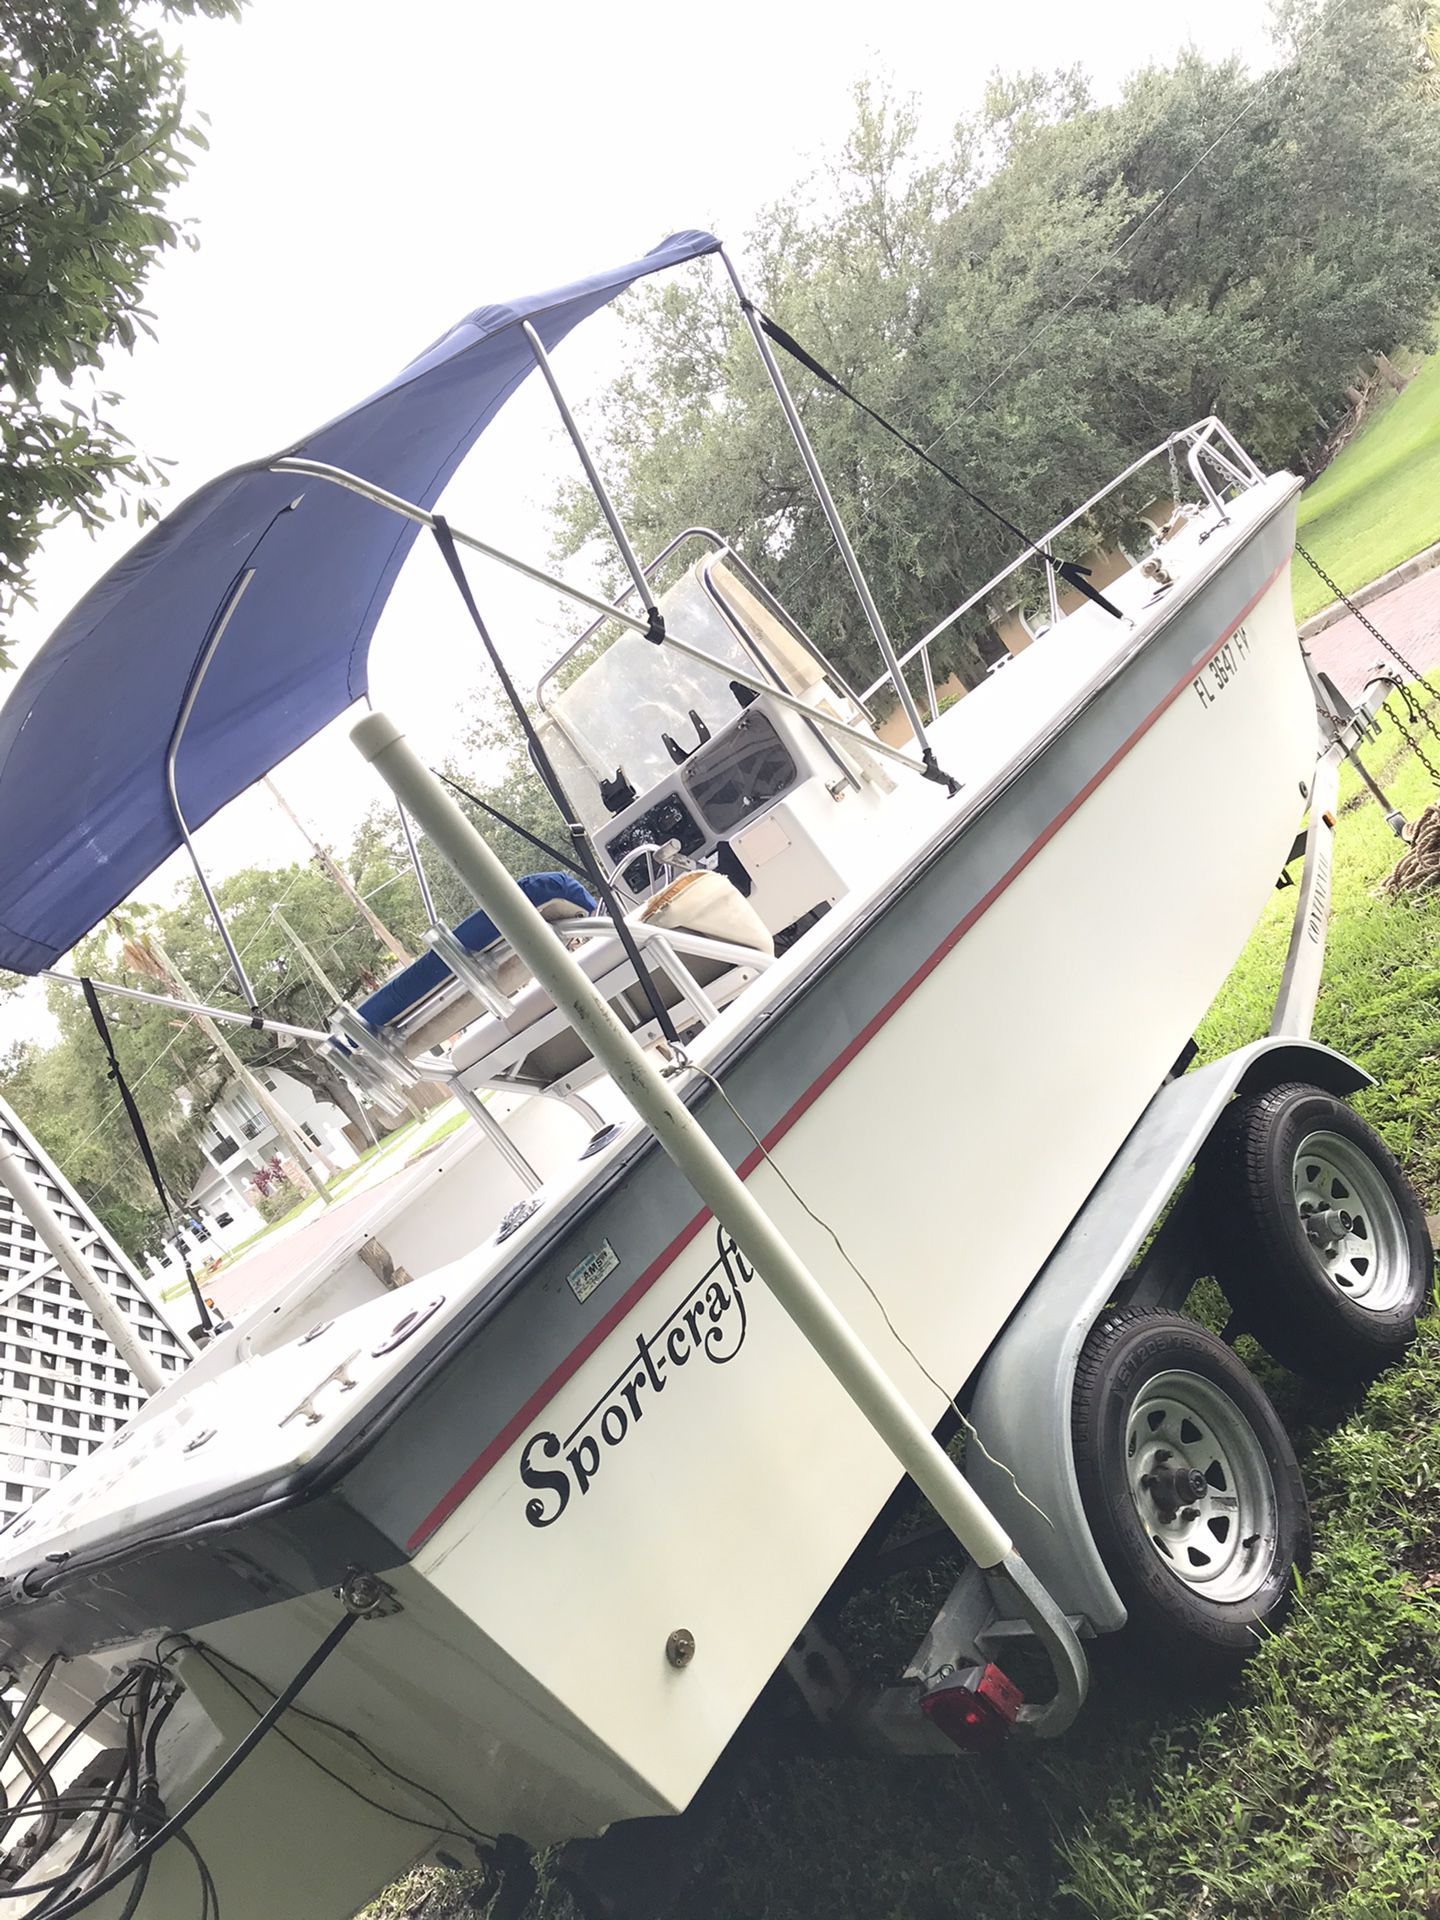 1988 Sportscraft 20 foot center console With a 2003 Yamaha 150hp Water Ready 6500 or best offer